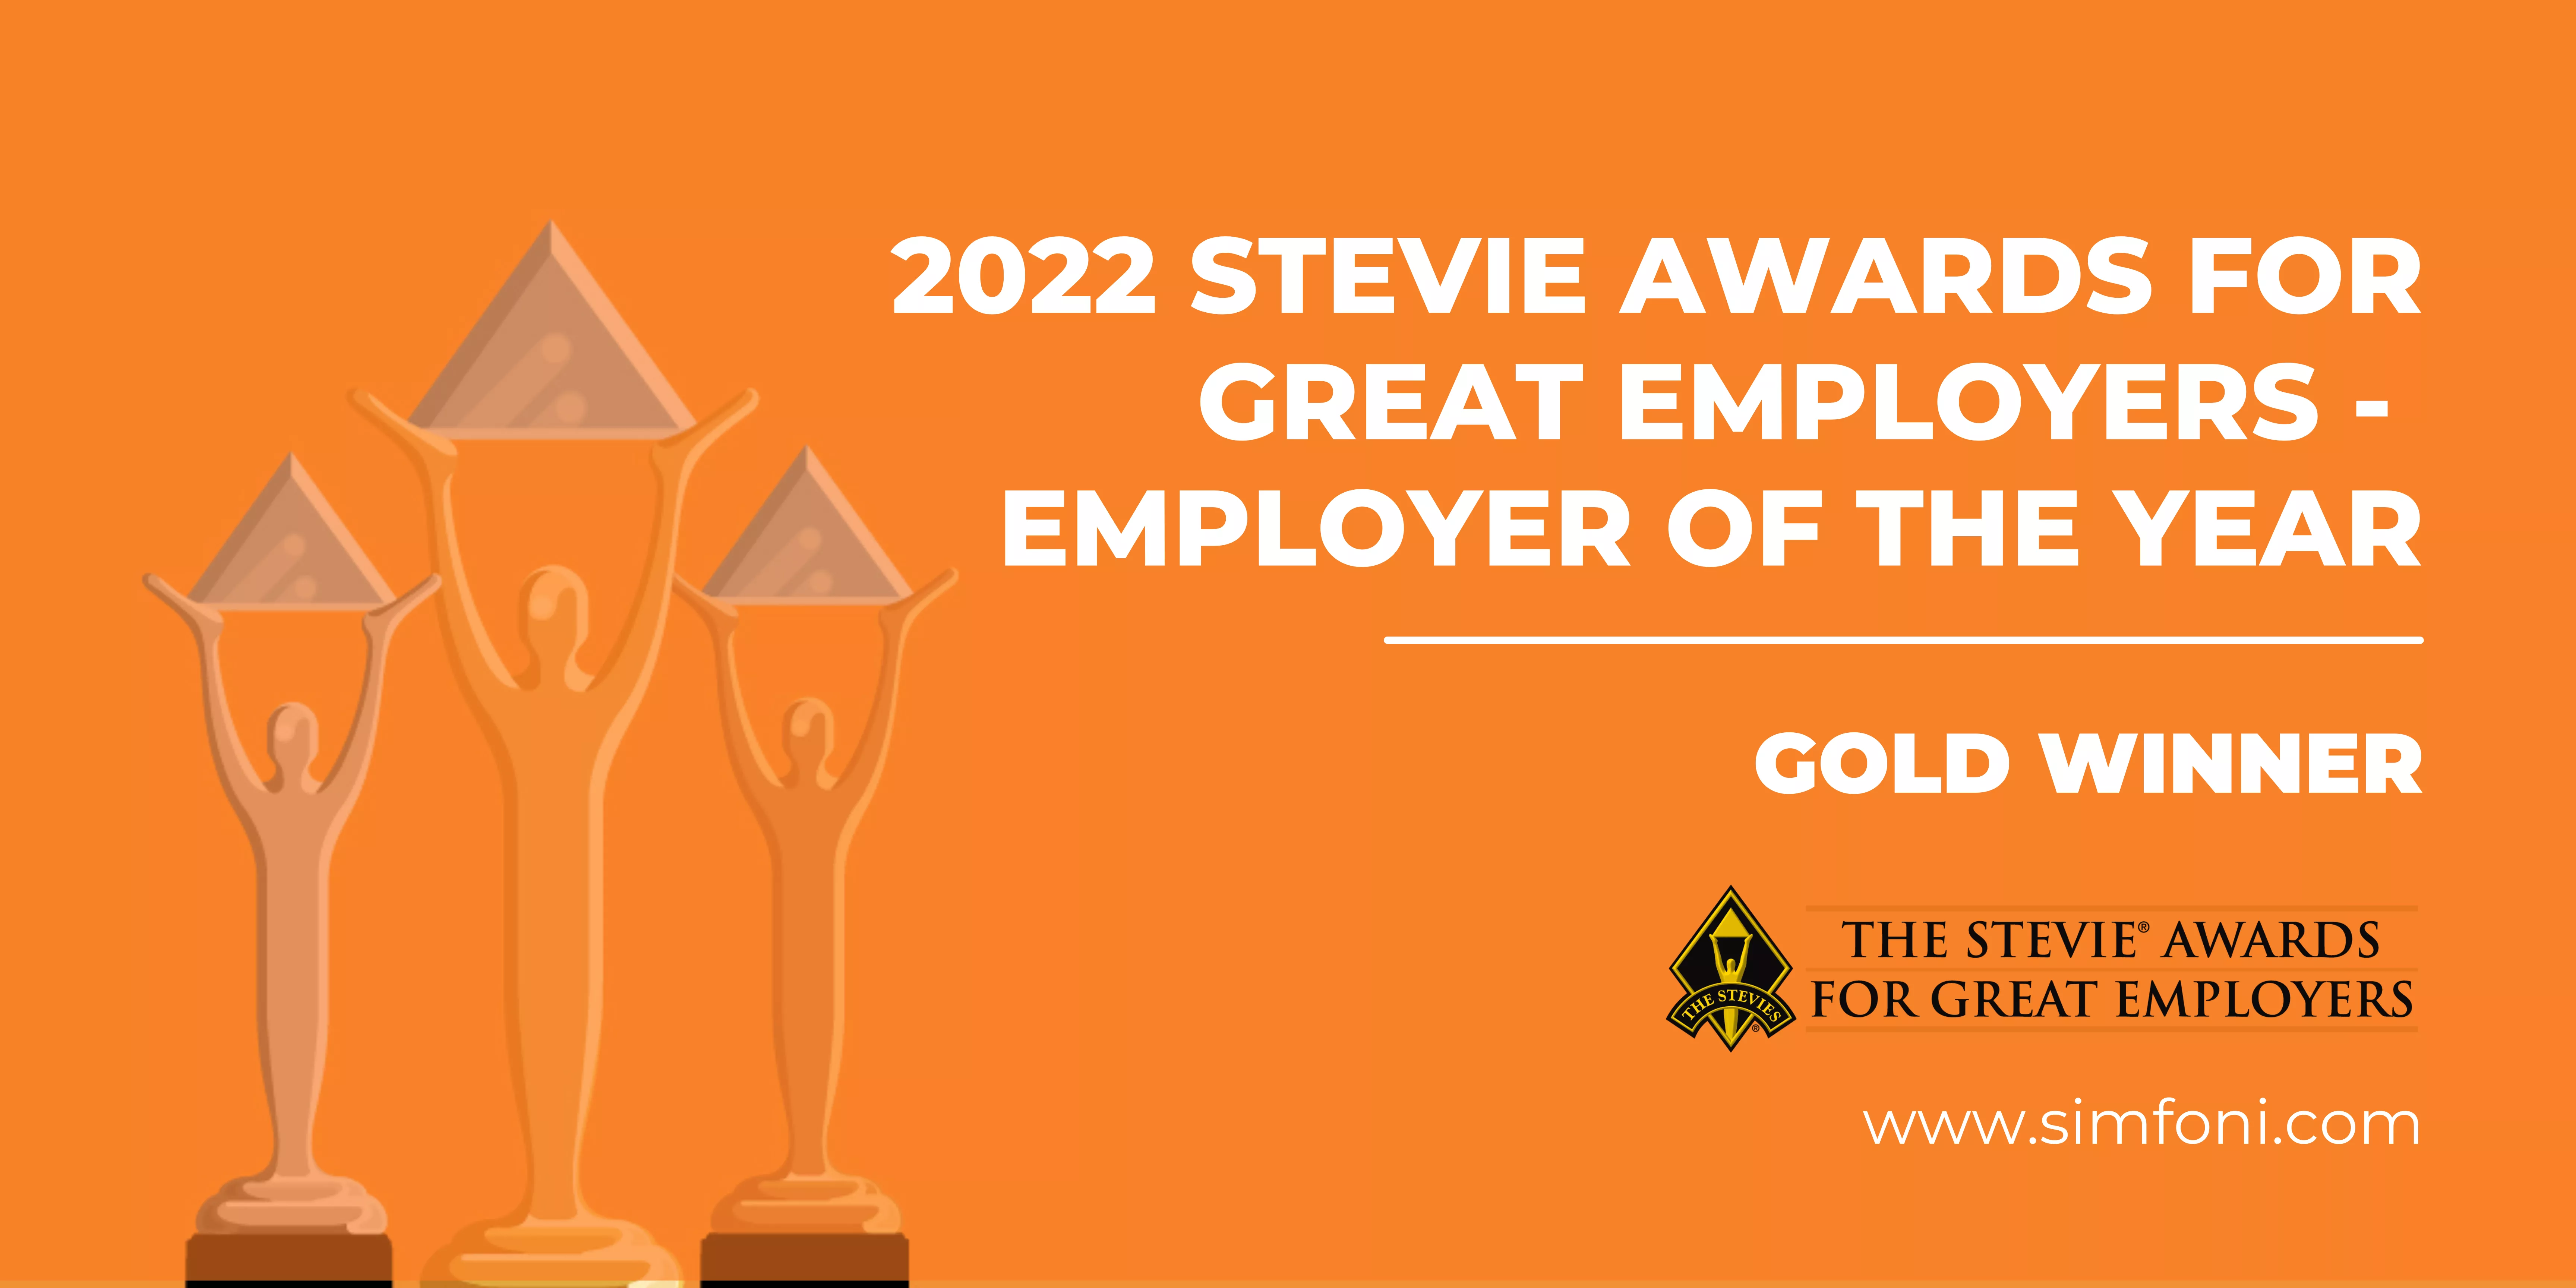 Simfoni Wins 2022 Gold “Employer of the Year” Stevie Award for Great Employers